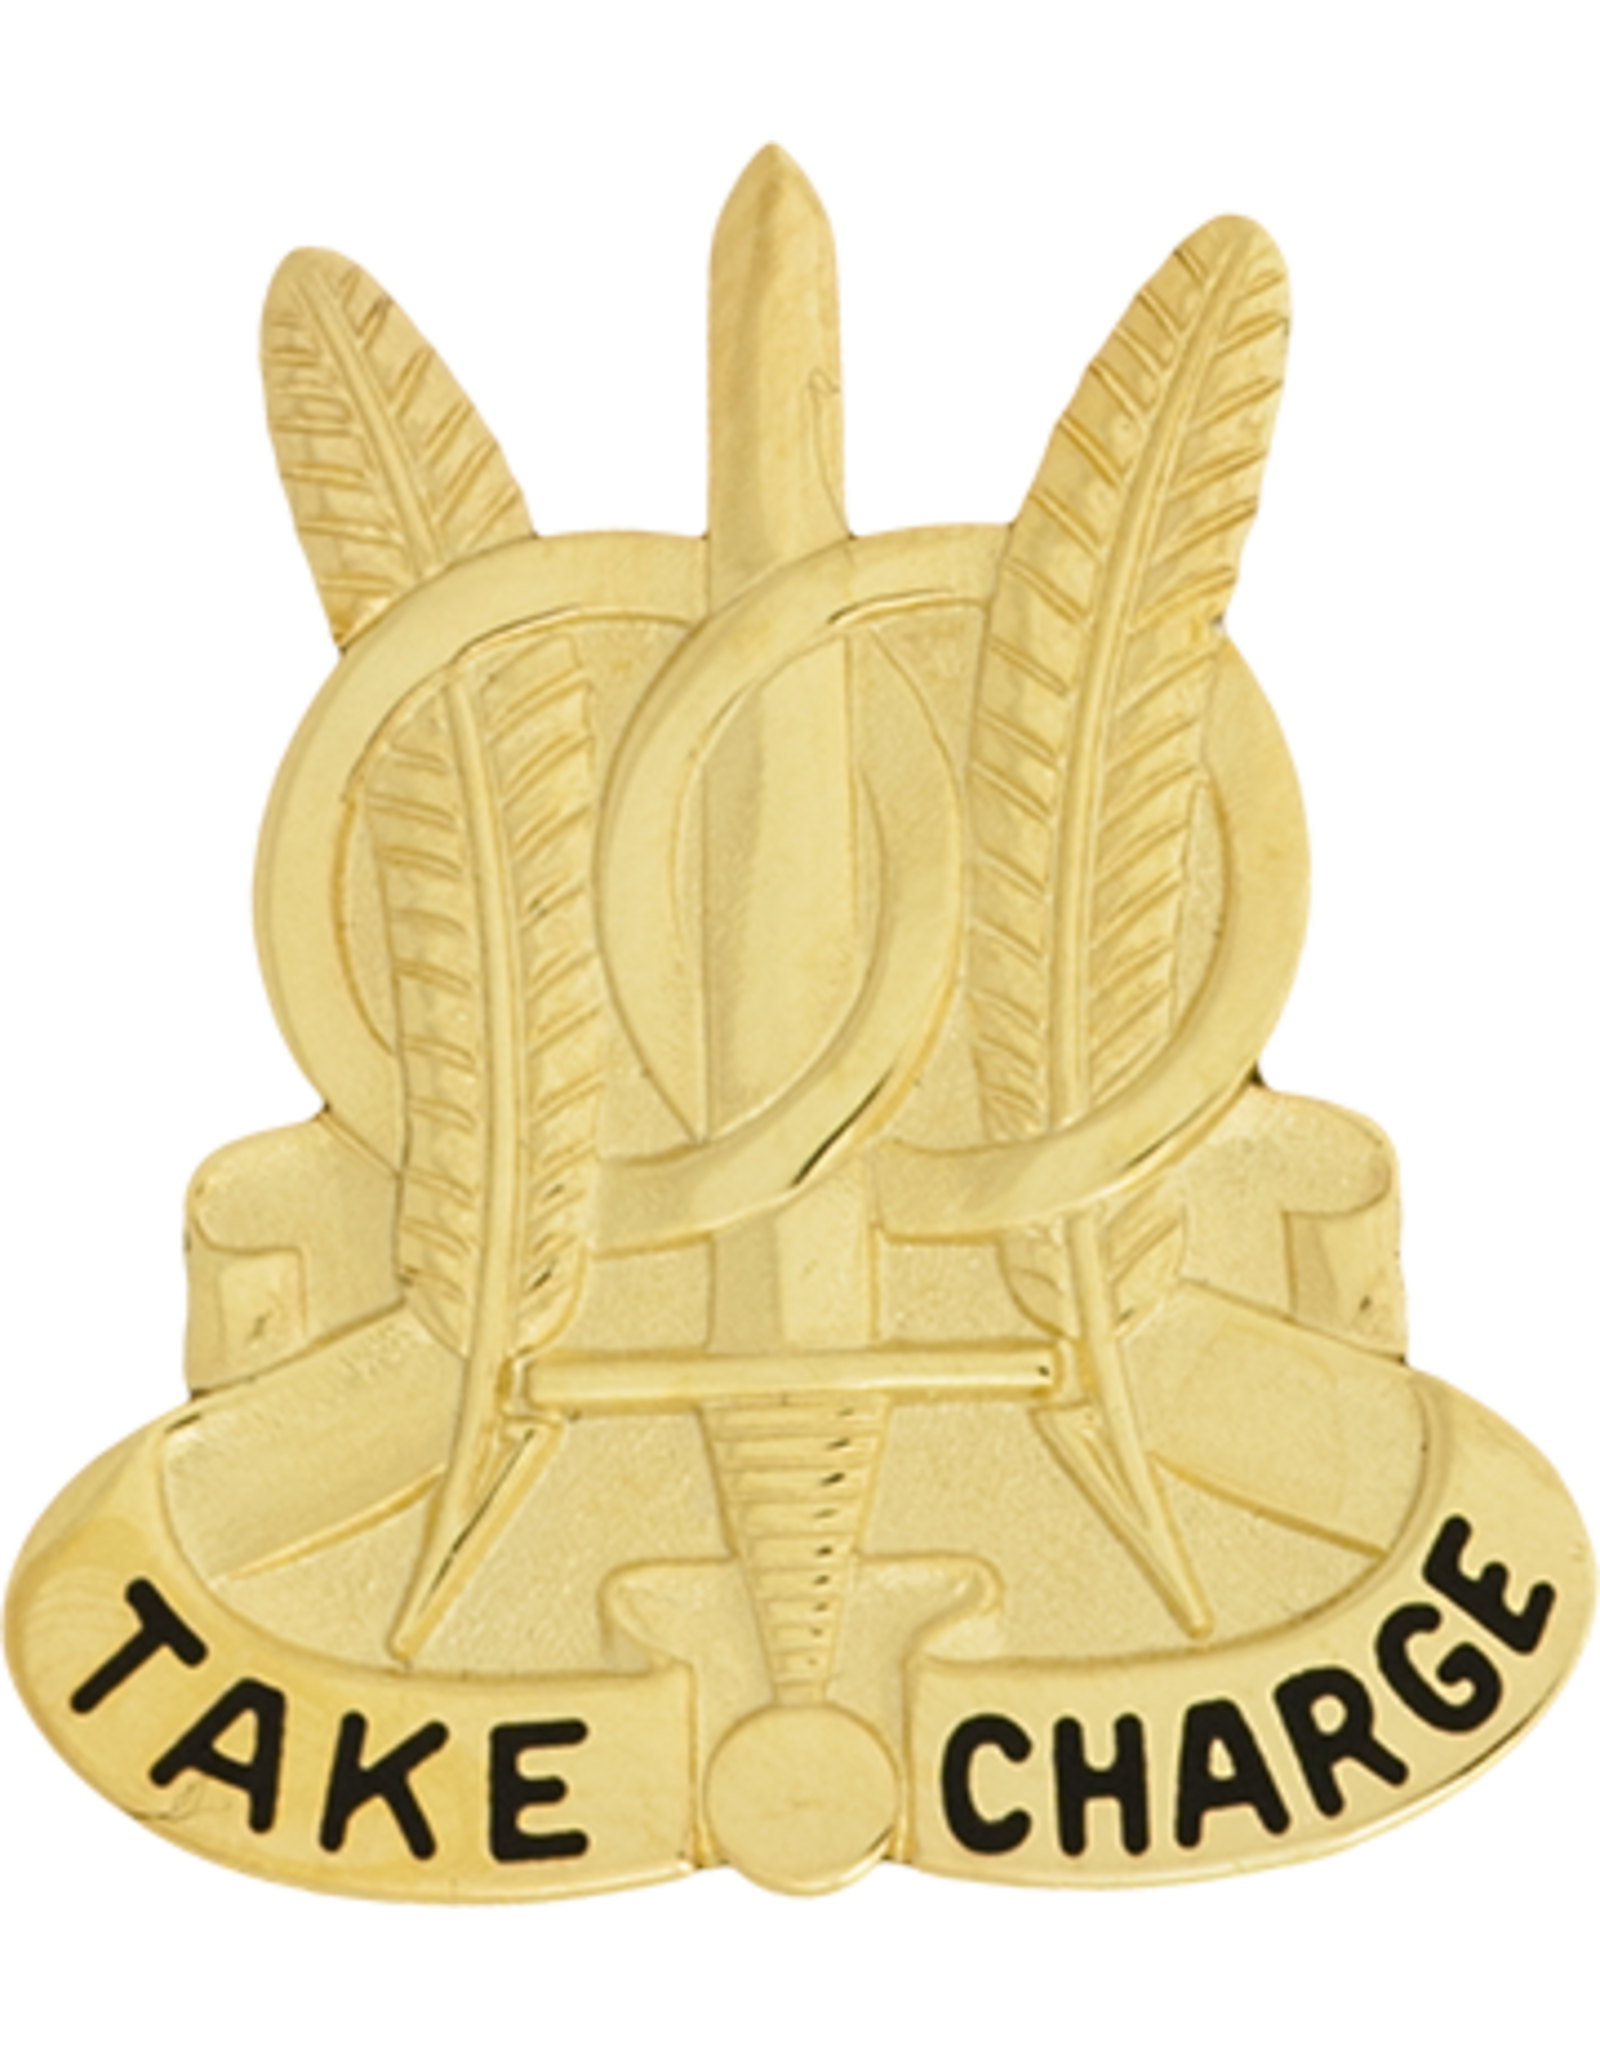 97th Military Police Unit Crest - Take Charge